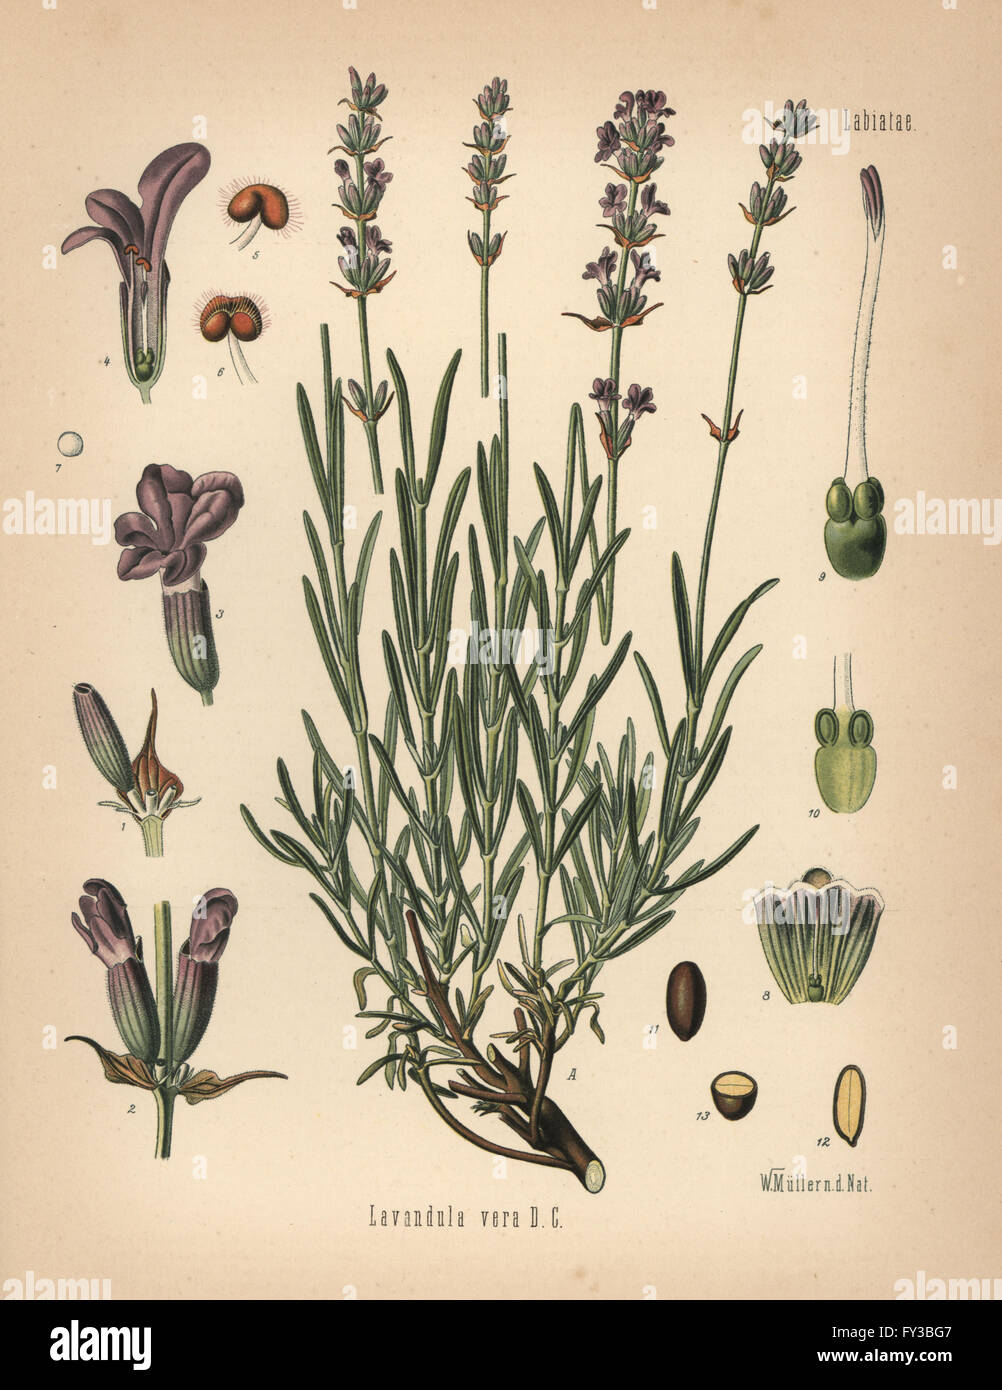 Lavender, Lavandula angustifolia subsp. pyrenaica (Lavandula vera). Chromolithograph after a botanical illustration by Walther Muller from Hermann Adolph Koehler's Medicinal Plants, edited by Gustav Pabst, Koehler, Germany, 1887. Stock Photo